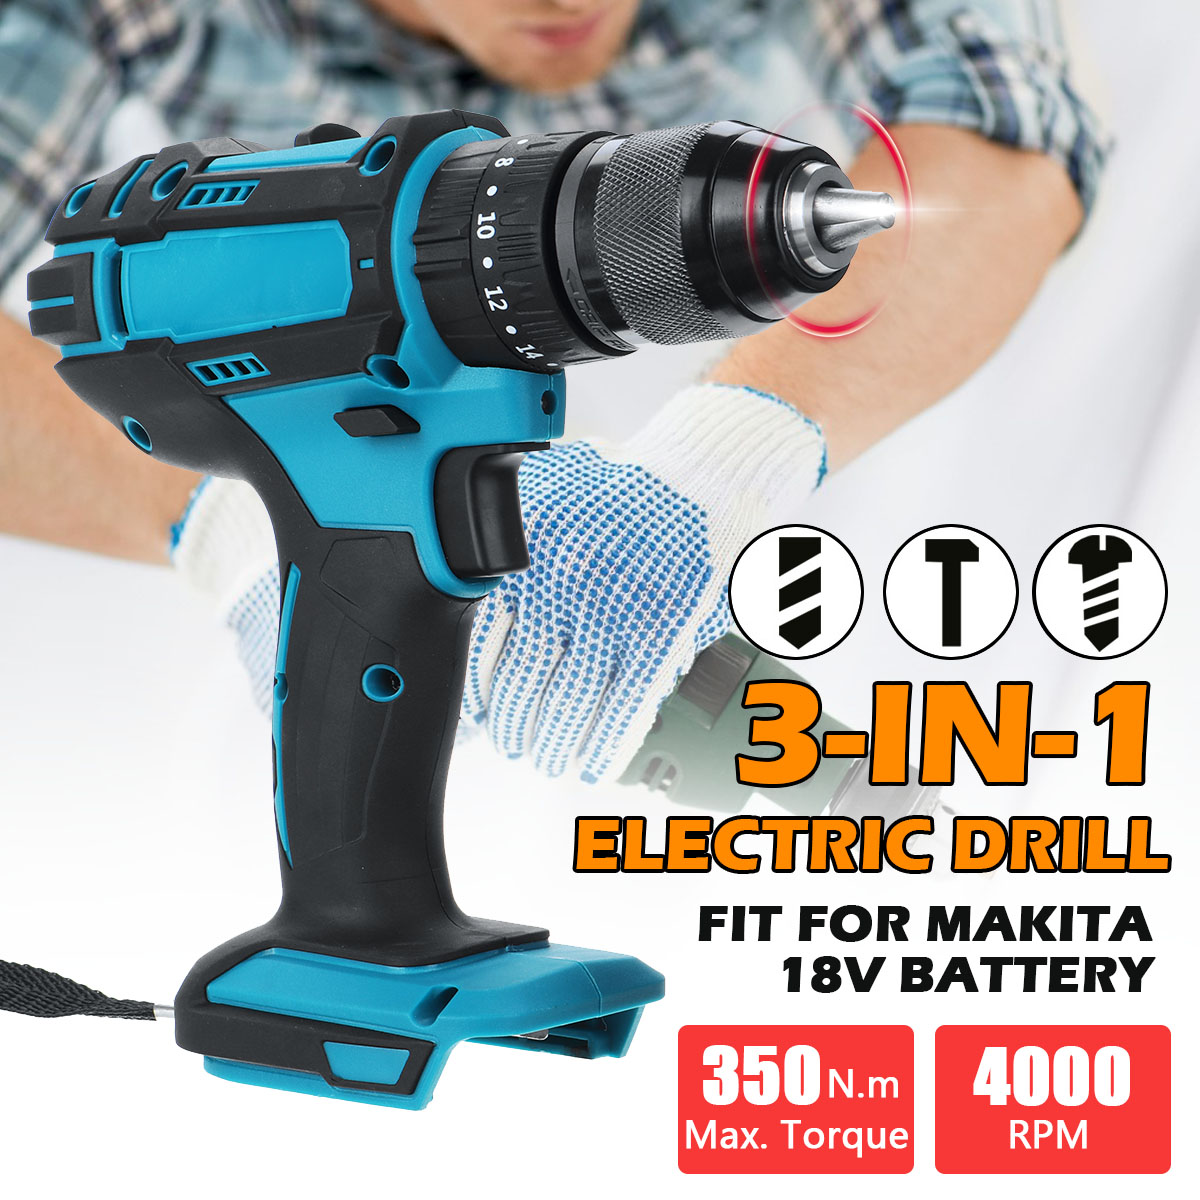 Drillpro-10mm-Chuck-Impact-Drill-350Nm-Cordless-Electric-Drill-For-Makita18V-Battery-4000RPM-LED-Lig-1642853-2